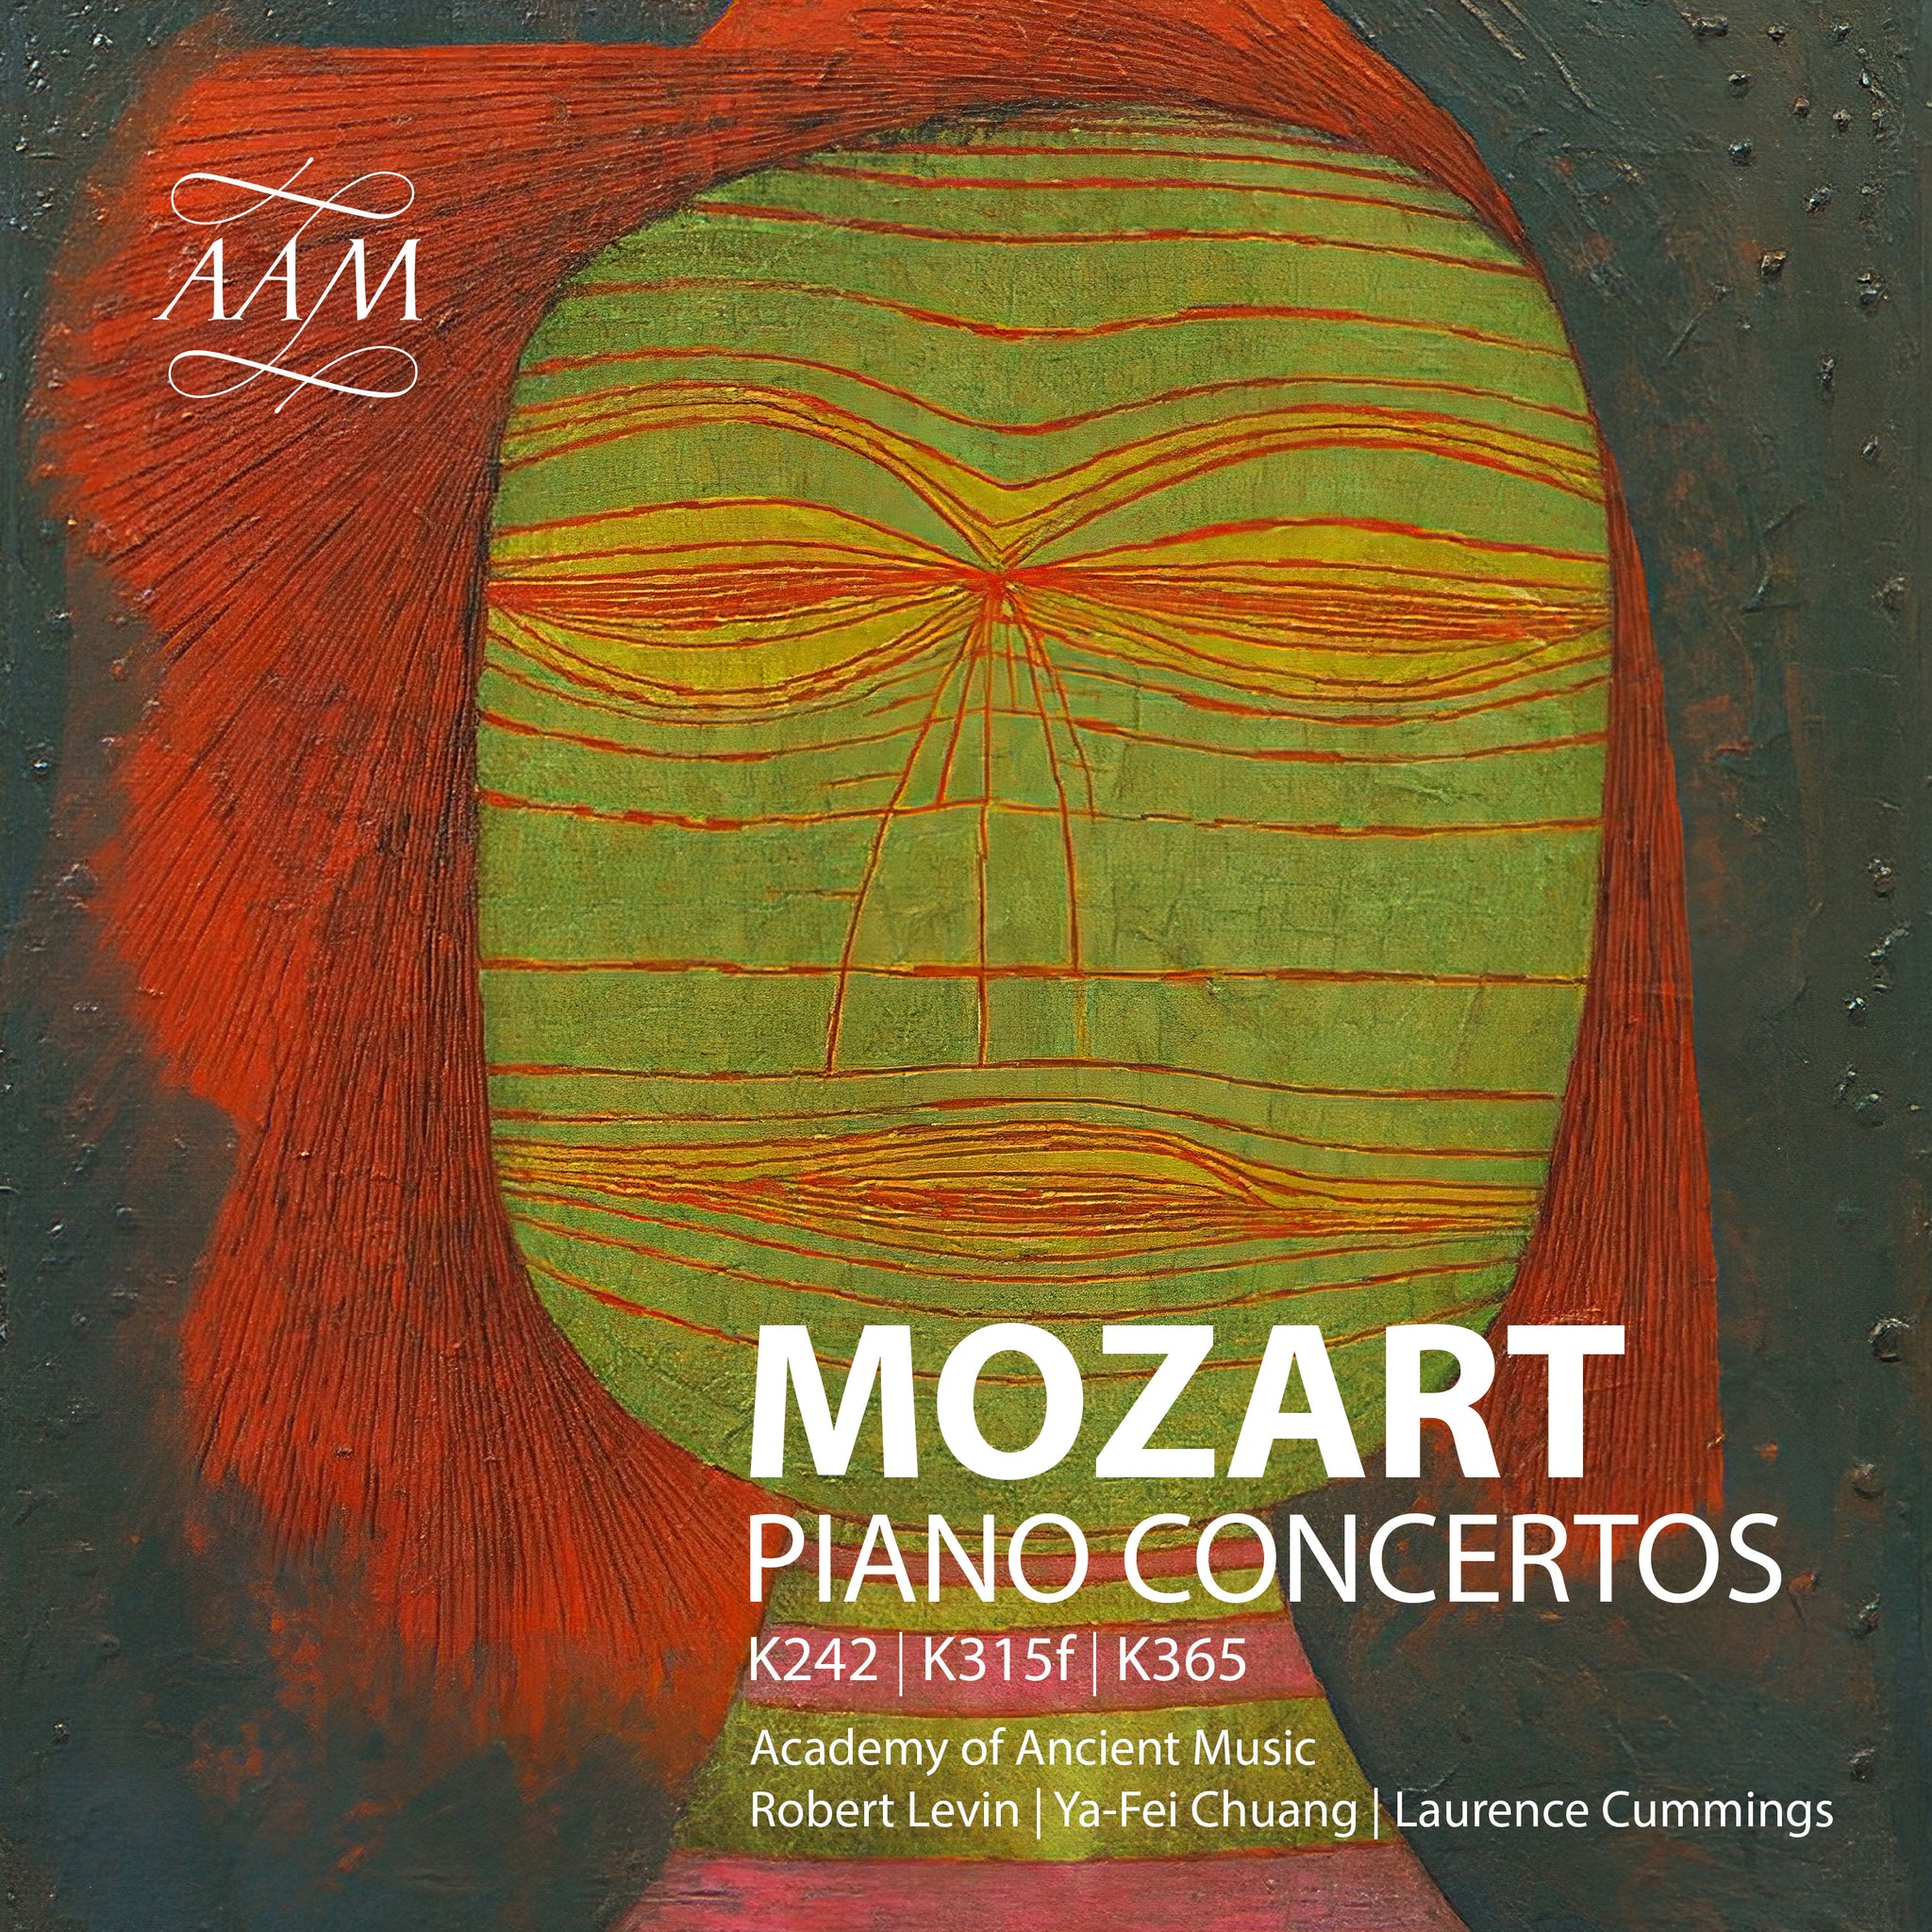 Mozart: Piano Concertos Nos. 7 & 10 / Levin, Ya-Fei Chuang, Academy of Ancient Music